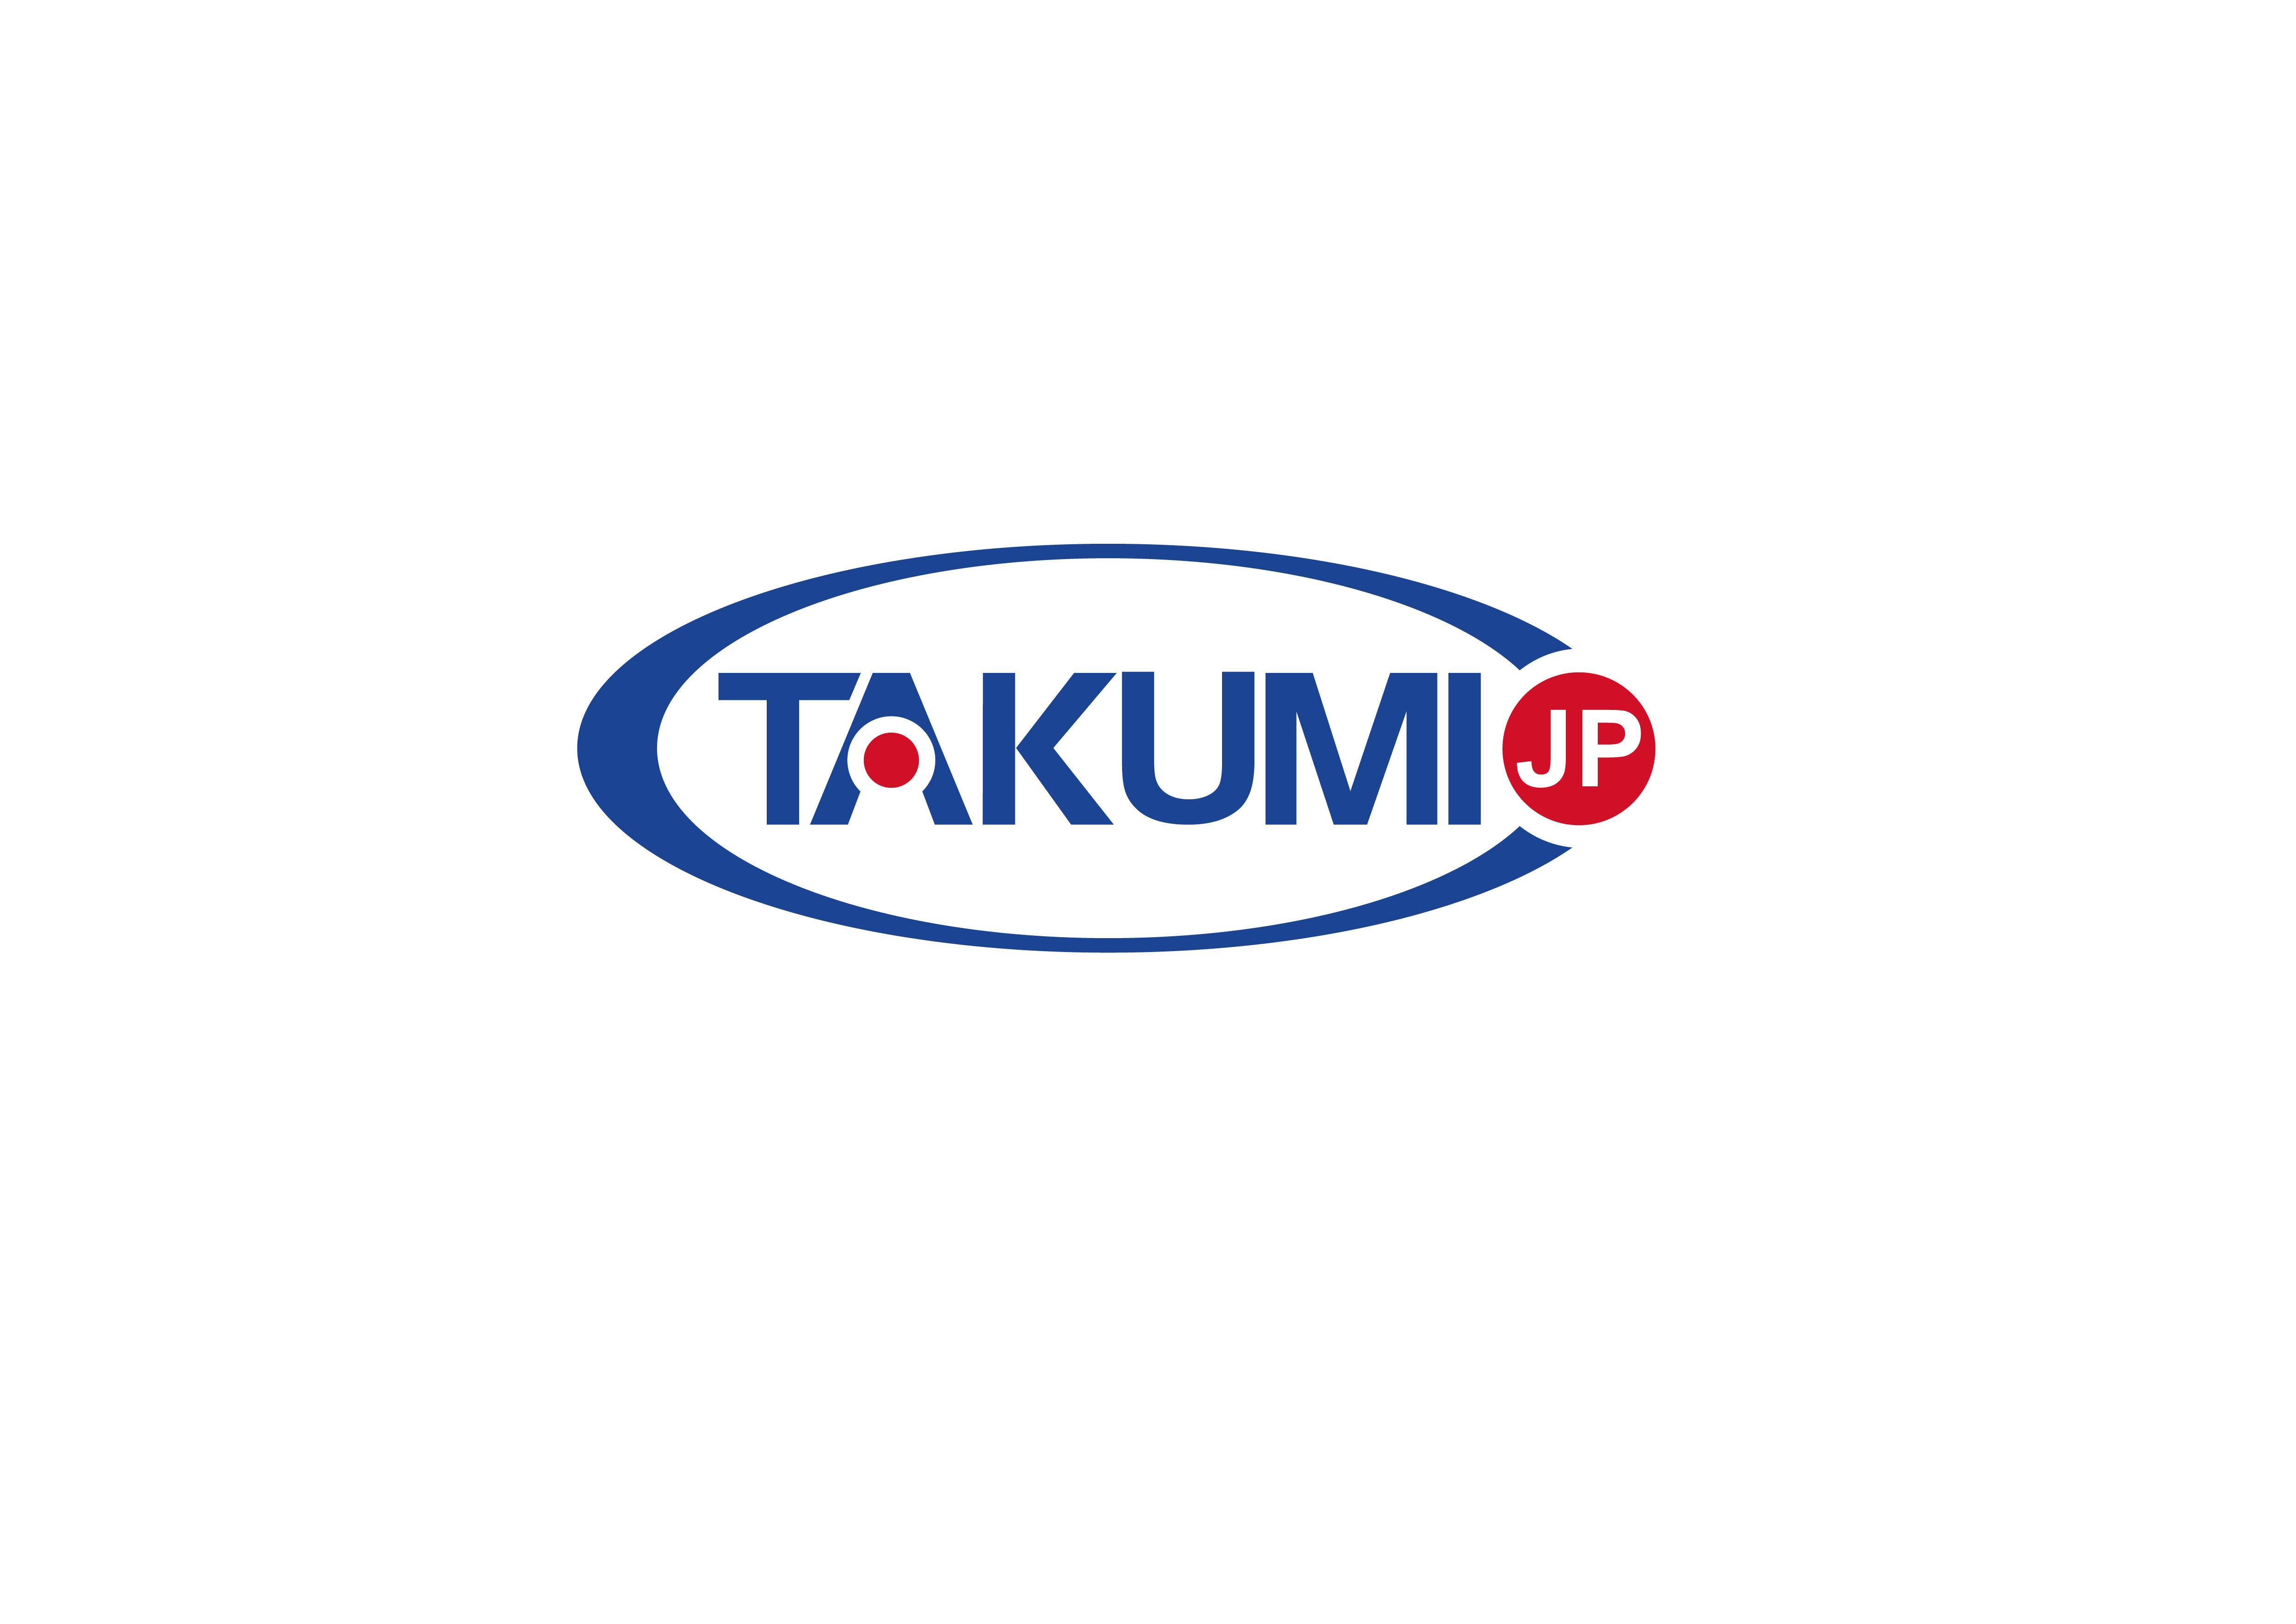 Latest company case about Takumi is now looking for a global exclusive distributor.